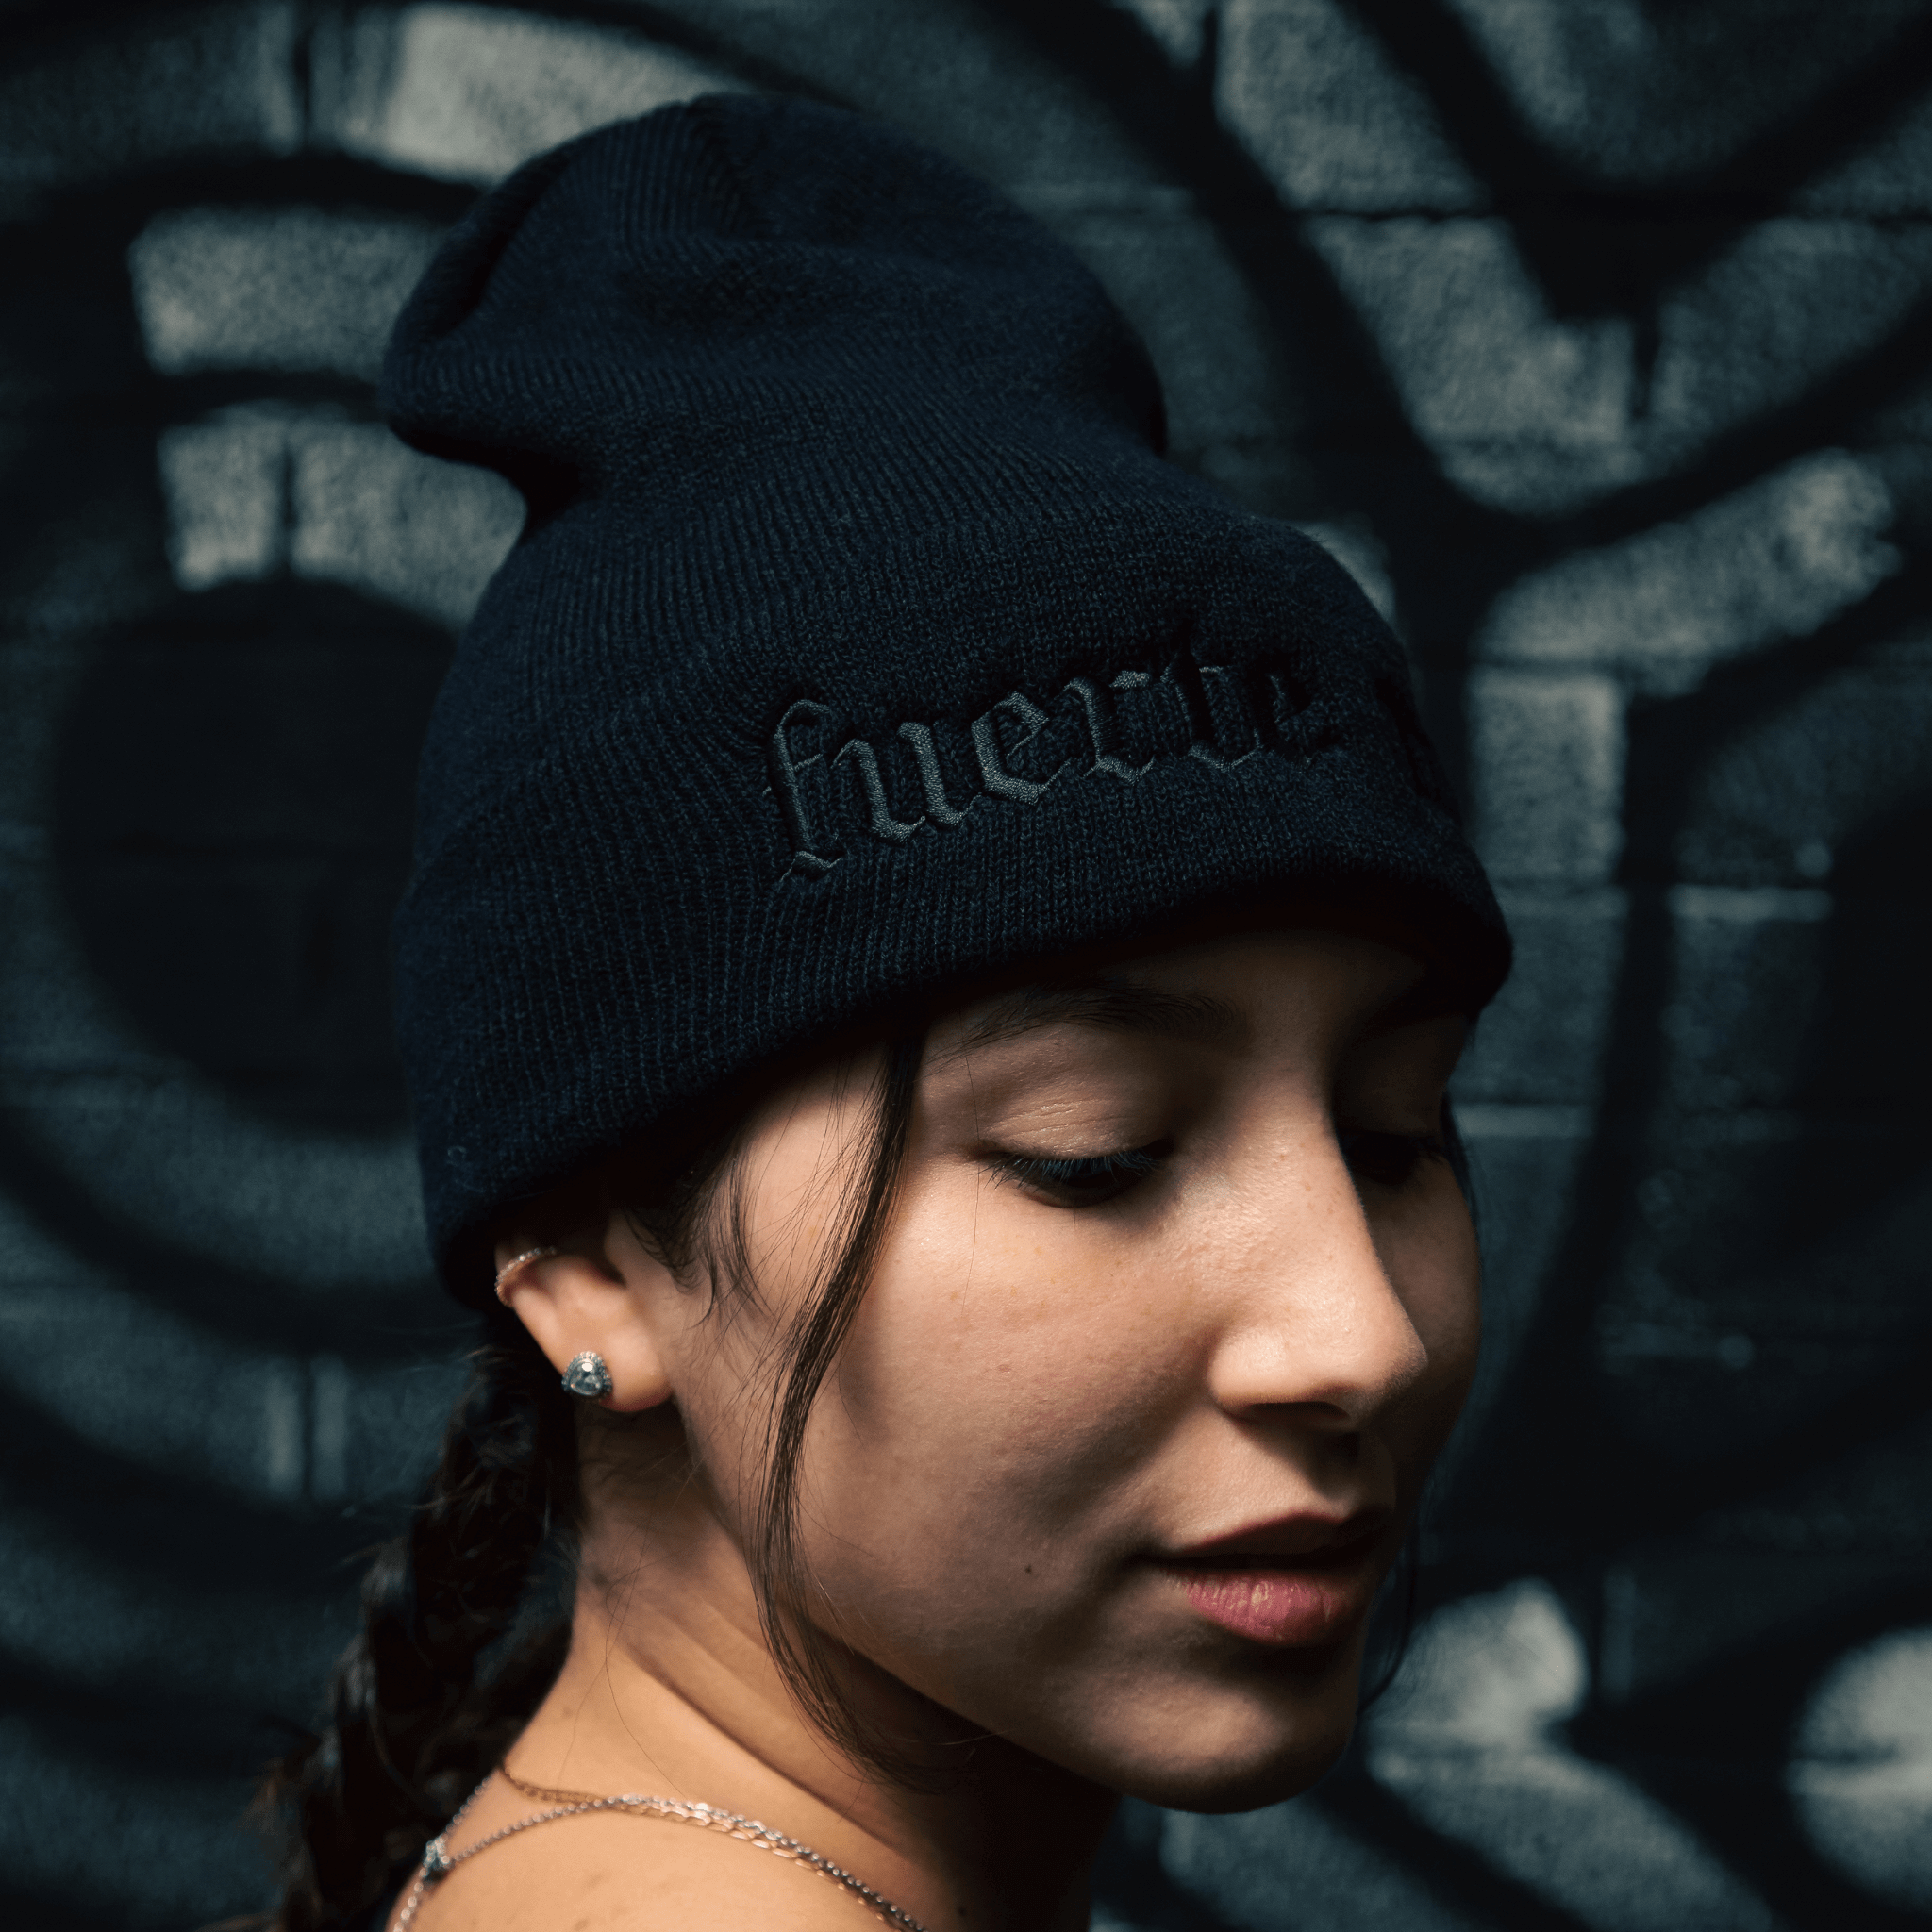 Noche fuerte af beanie - Latina Lifters